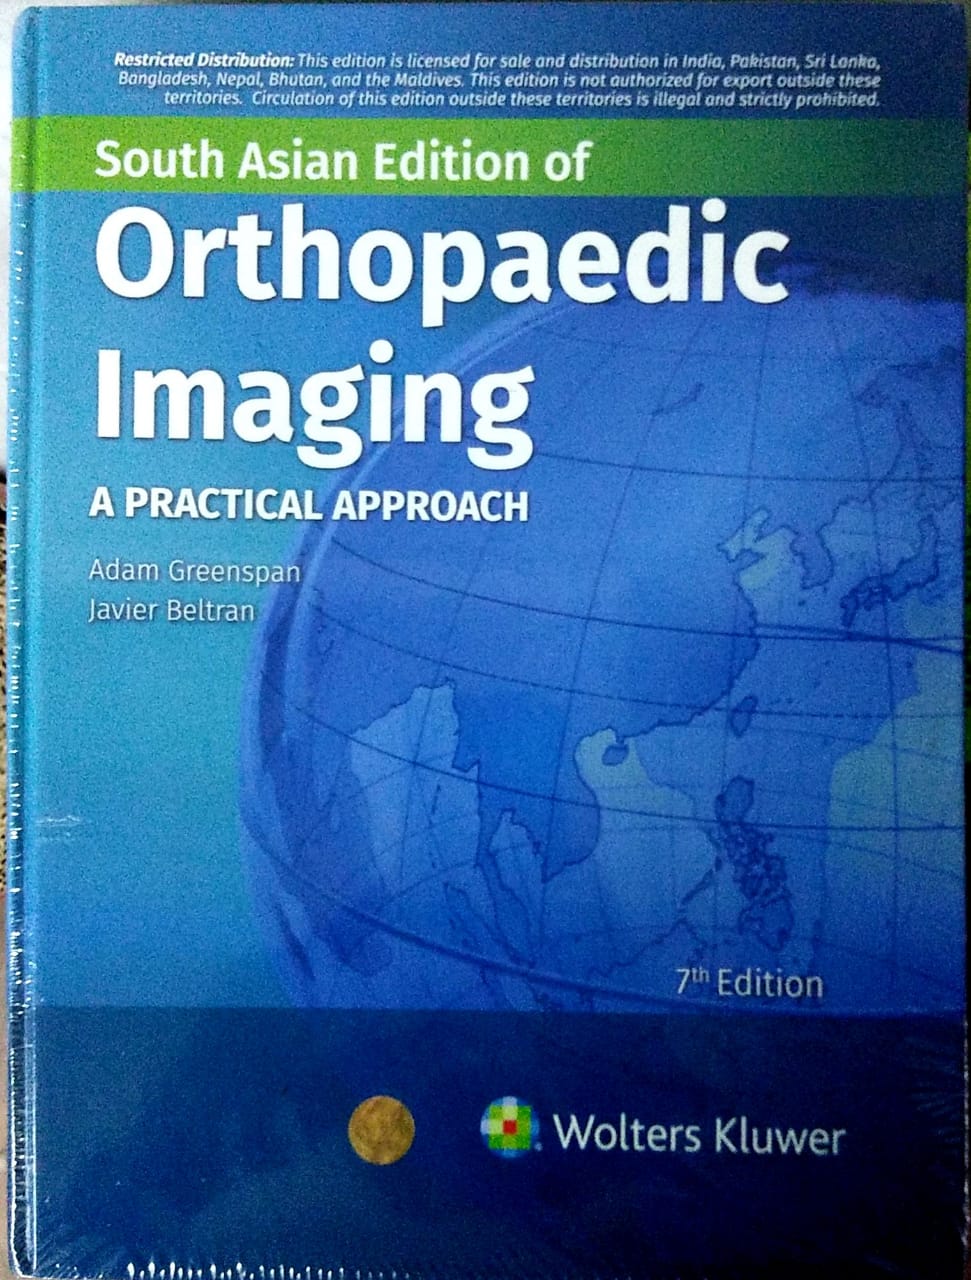 Orthopaedic Imaging A Practical Approach South Asian Edition 7th Edition